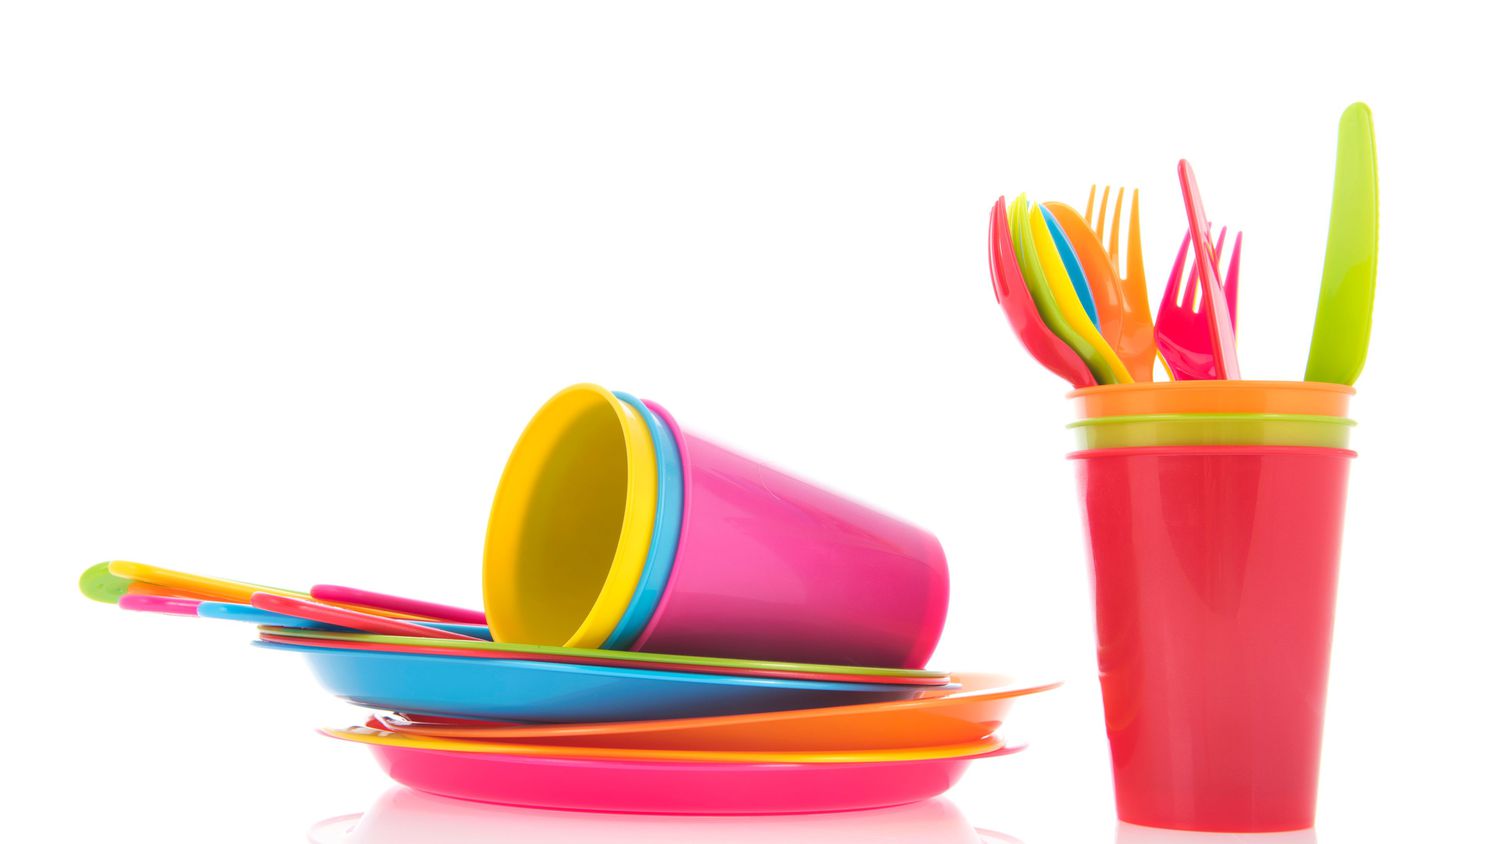 plastic cutlery and plates